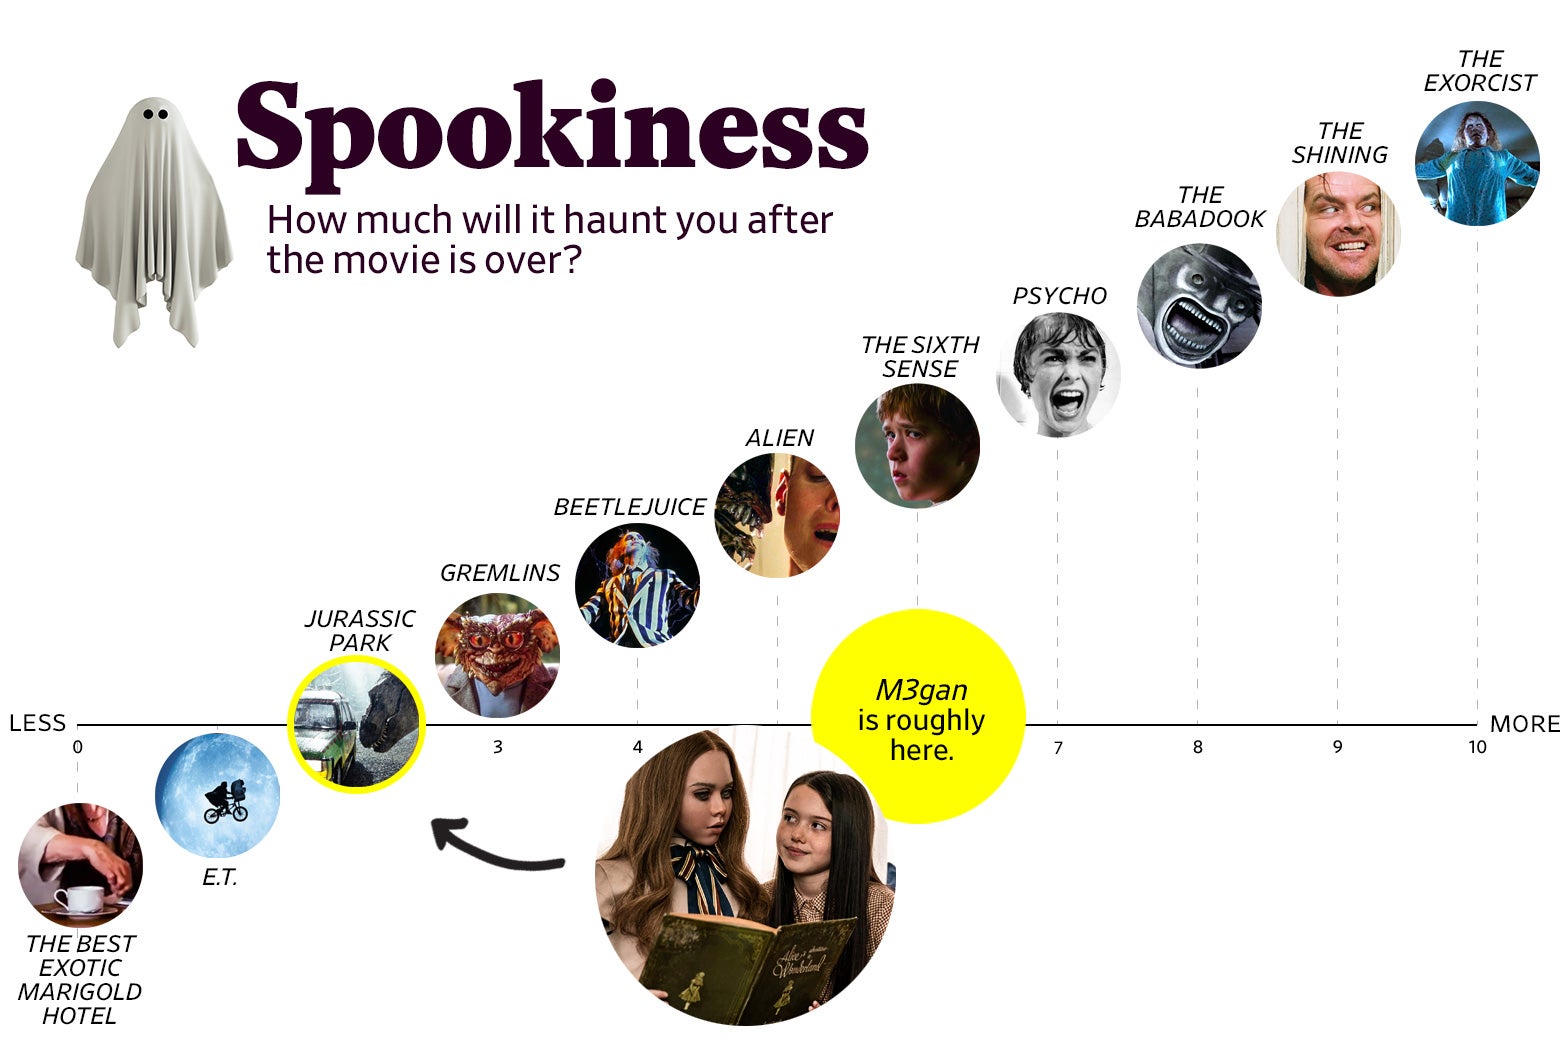 A chart titled “Spookiness: How much will it haunt you after the movie is over?” shows that M3gan ranks a 2 in spookiness, roughly the same as E.T. The scale ranges from The Best Exotic Marigold Hotel (0) to The Exorcist (10).